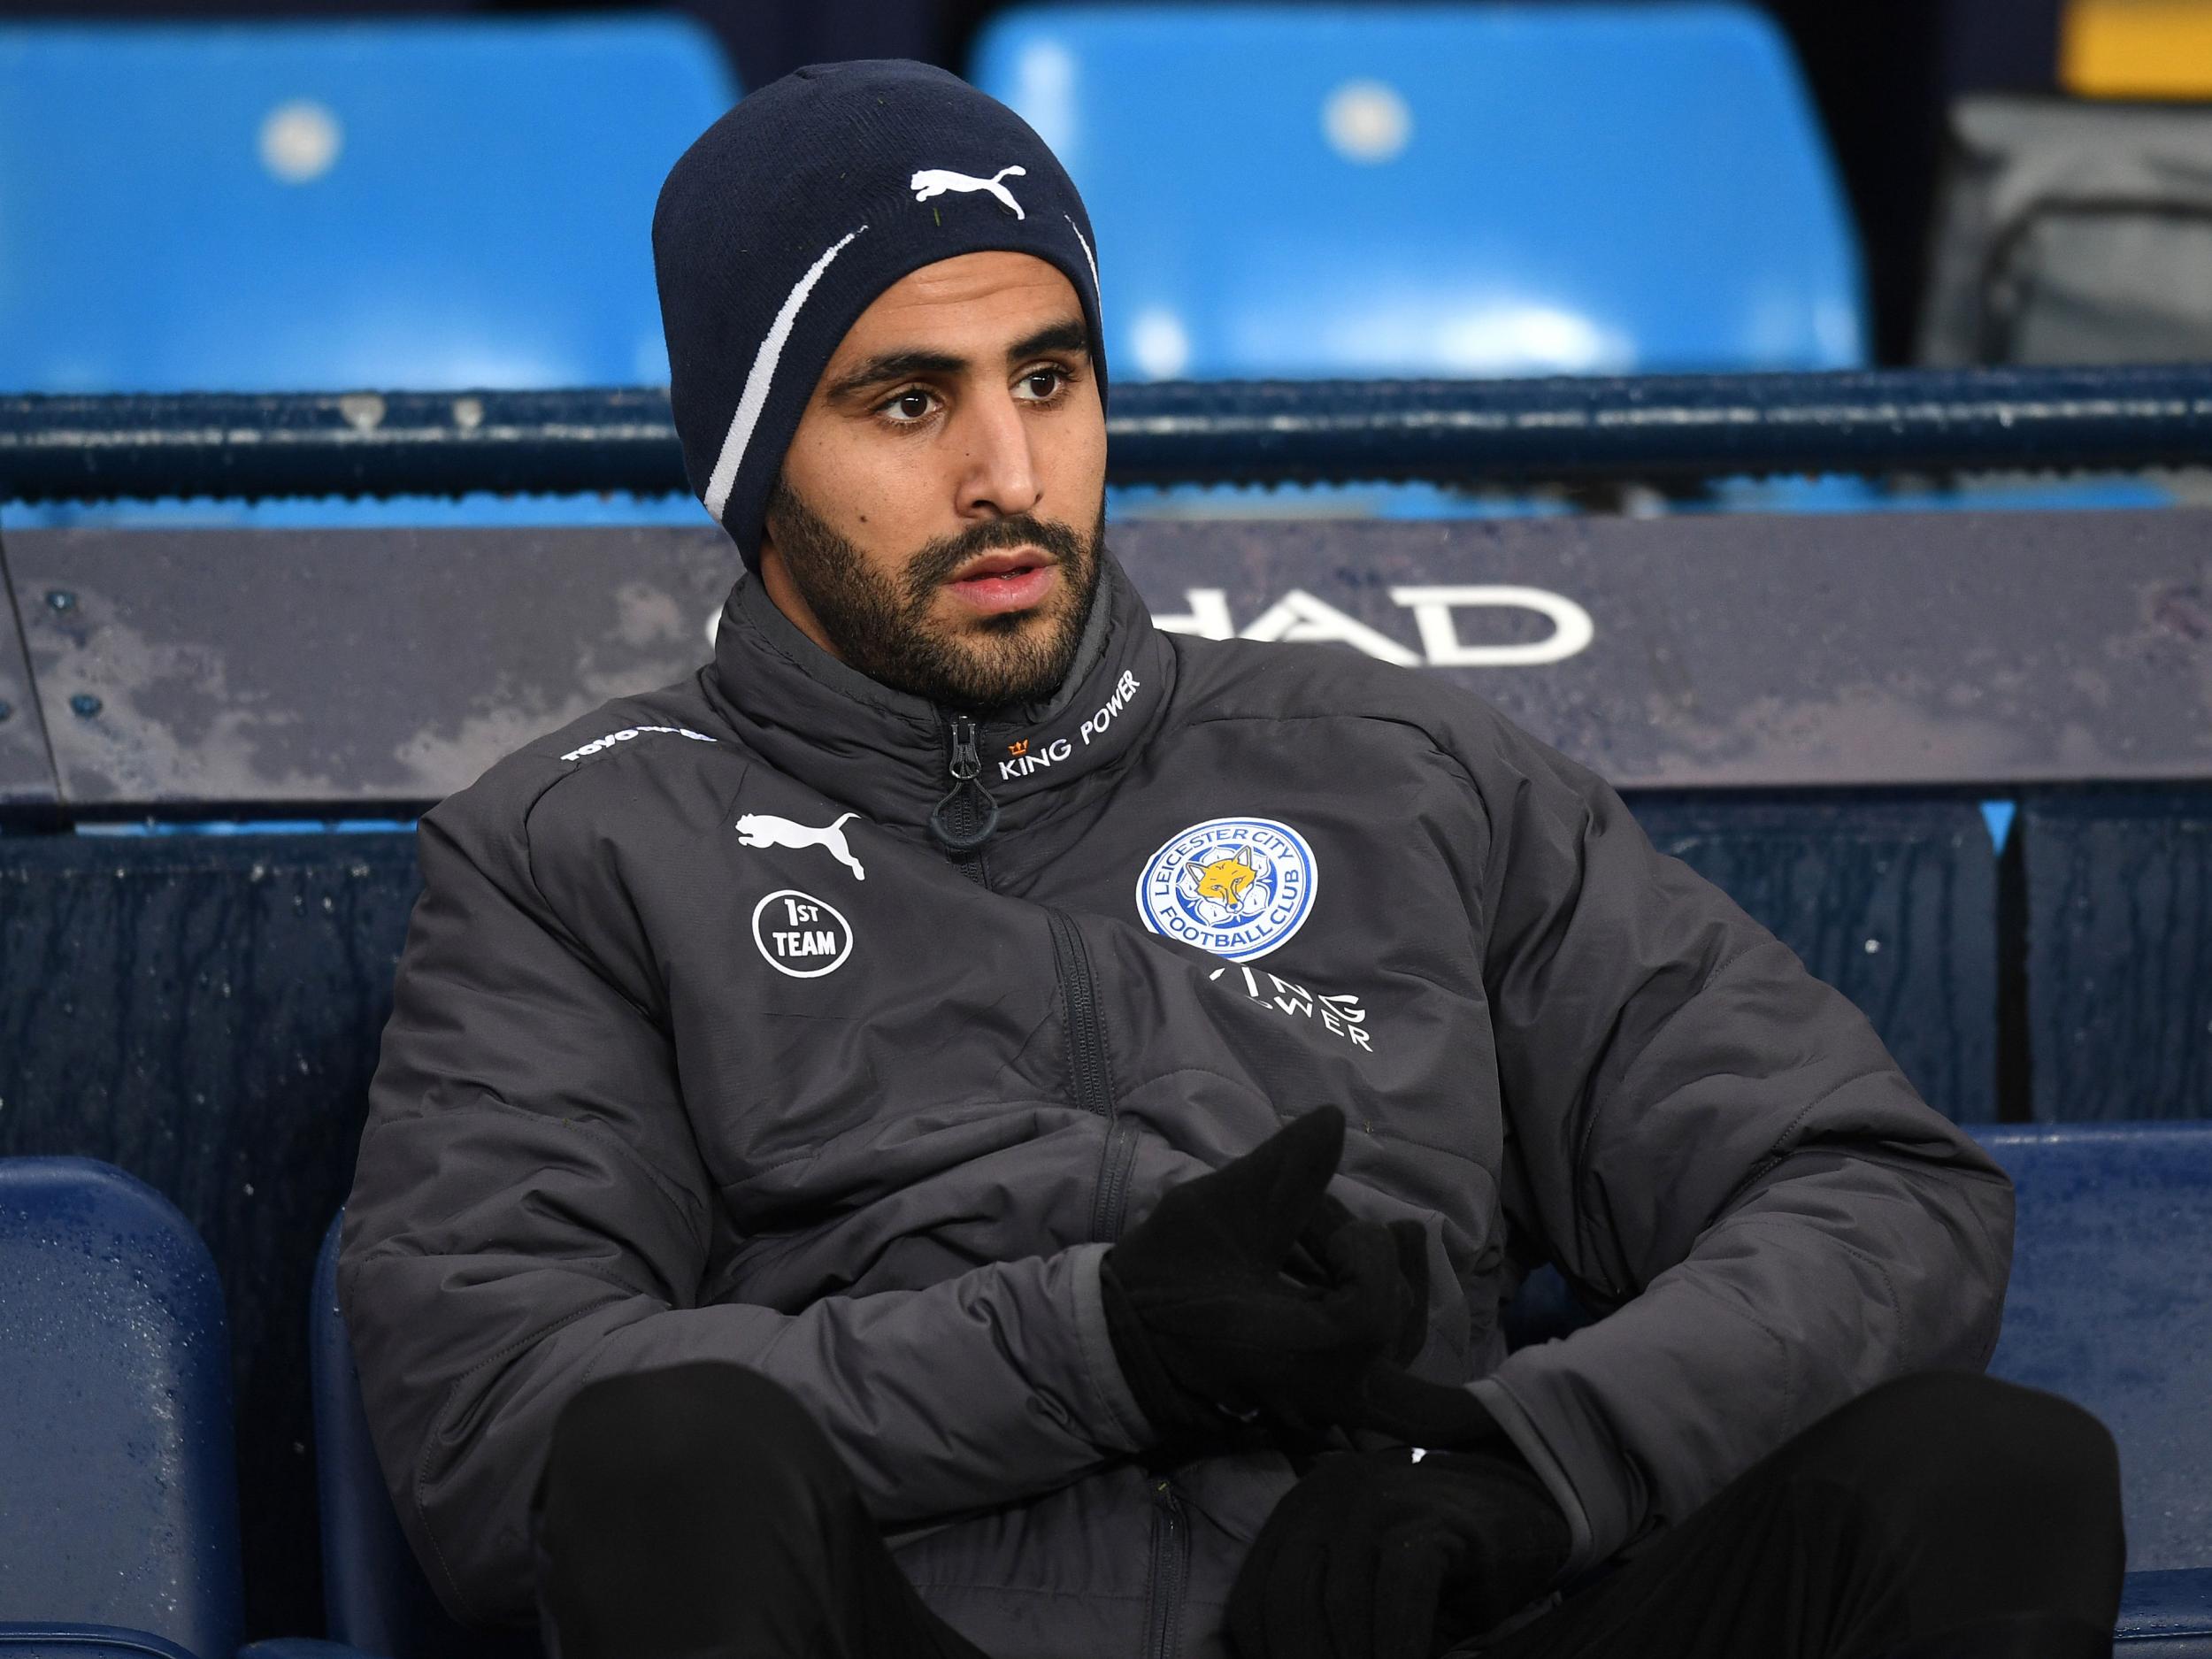 Riyad Mahrez saw his move to Manchester City collapse late in January